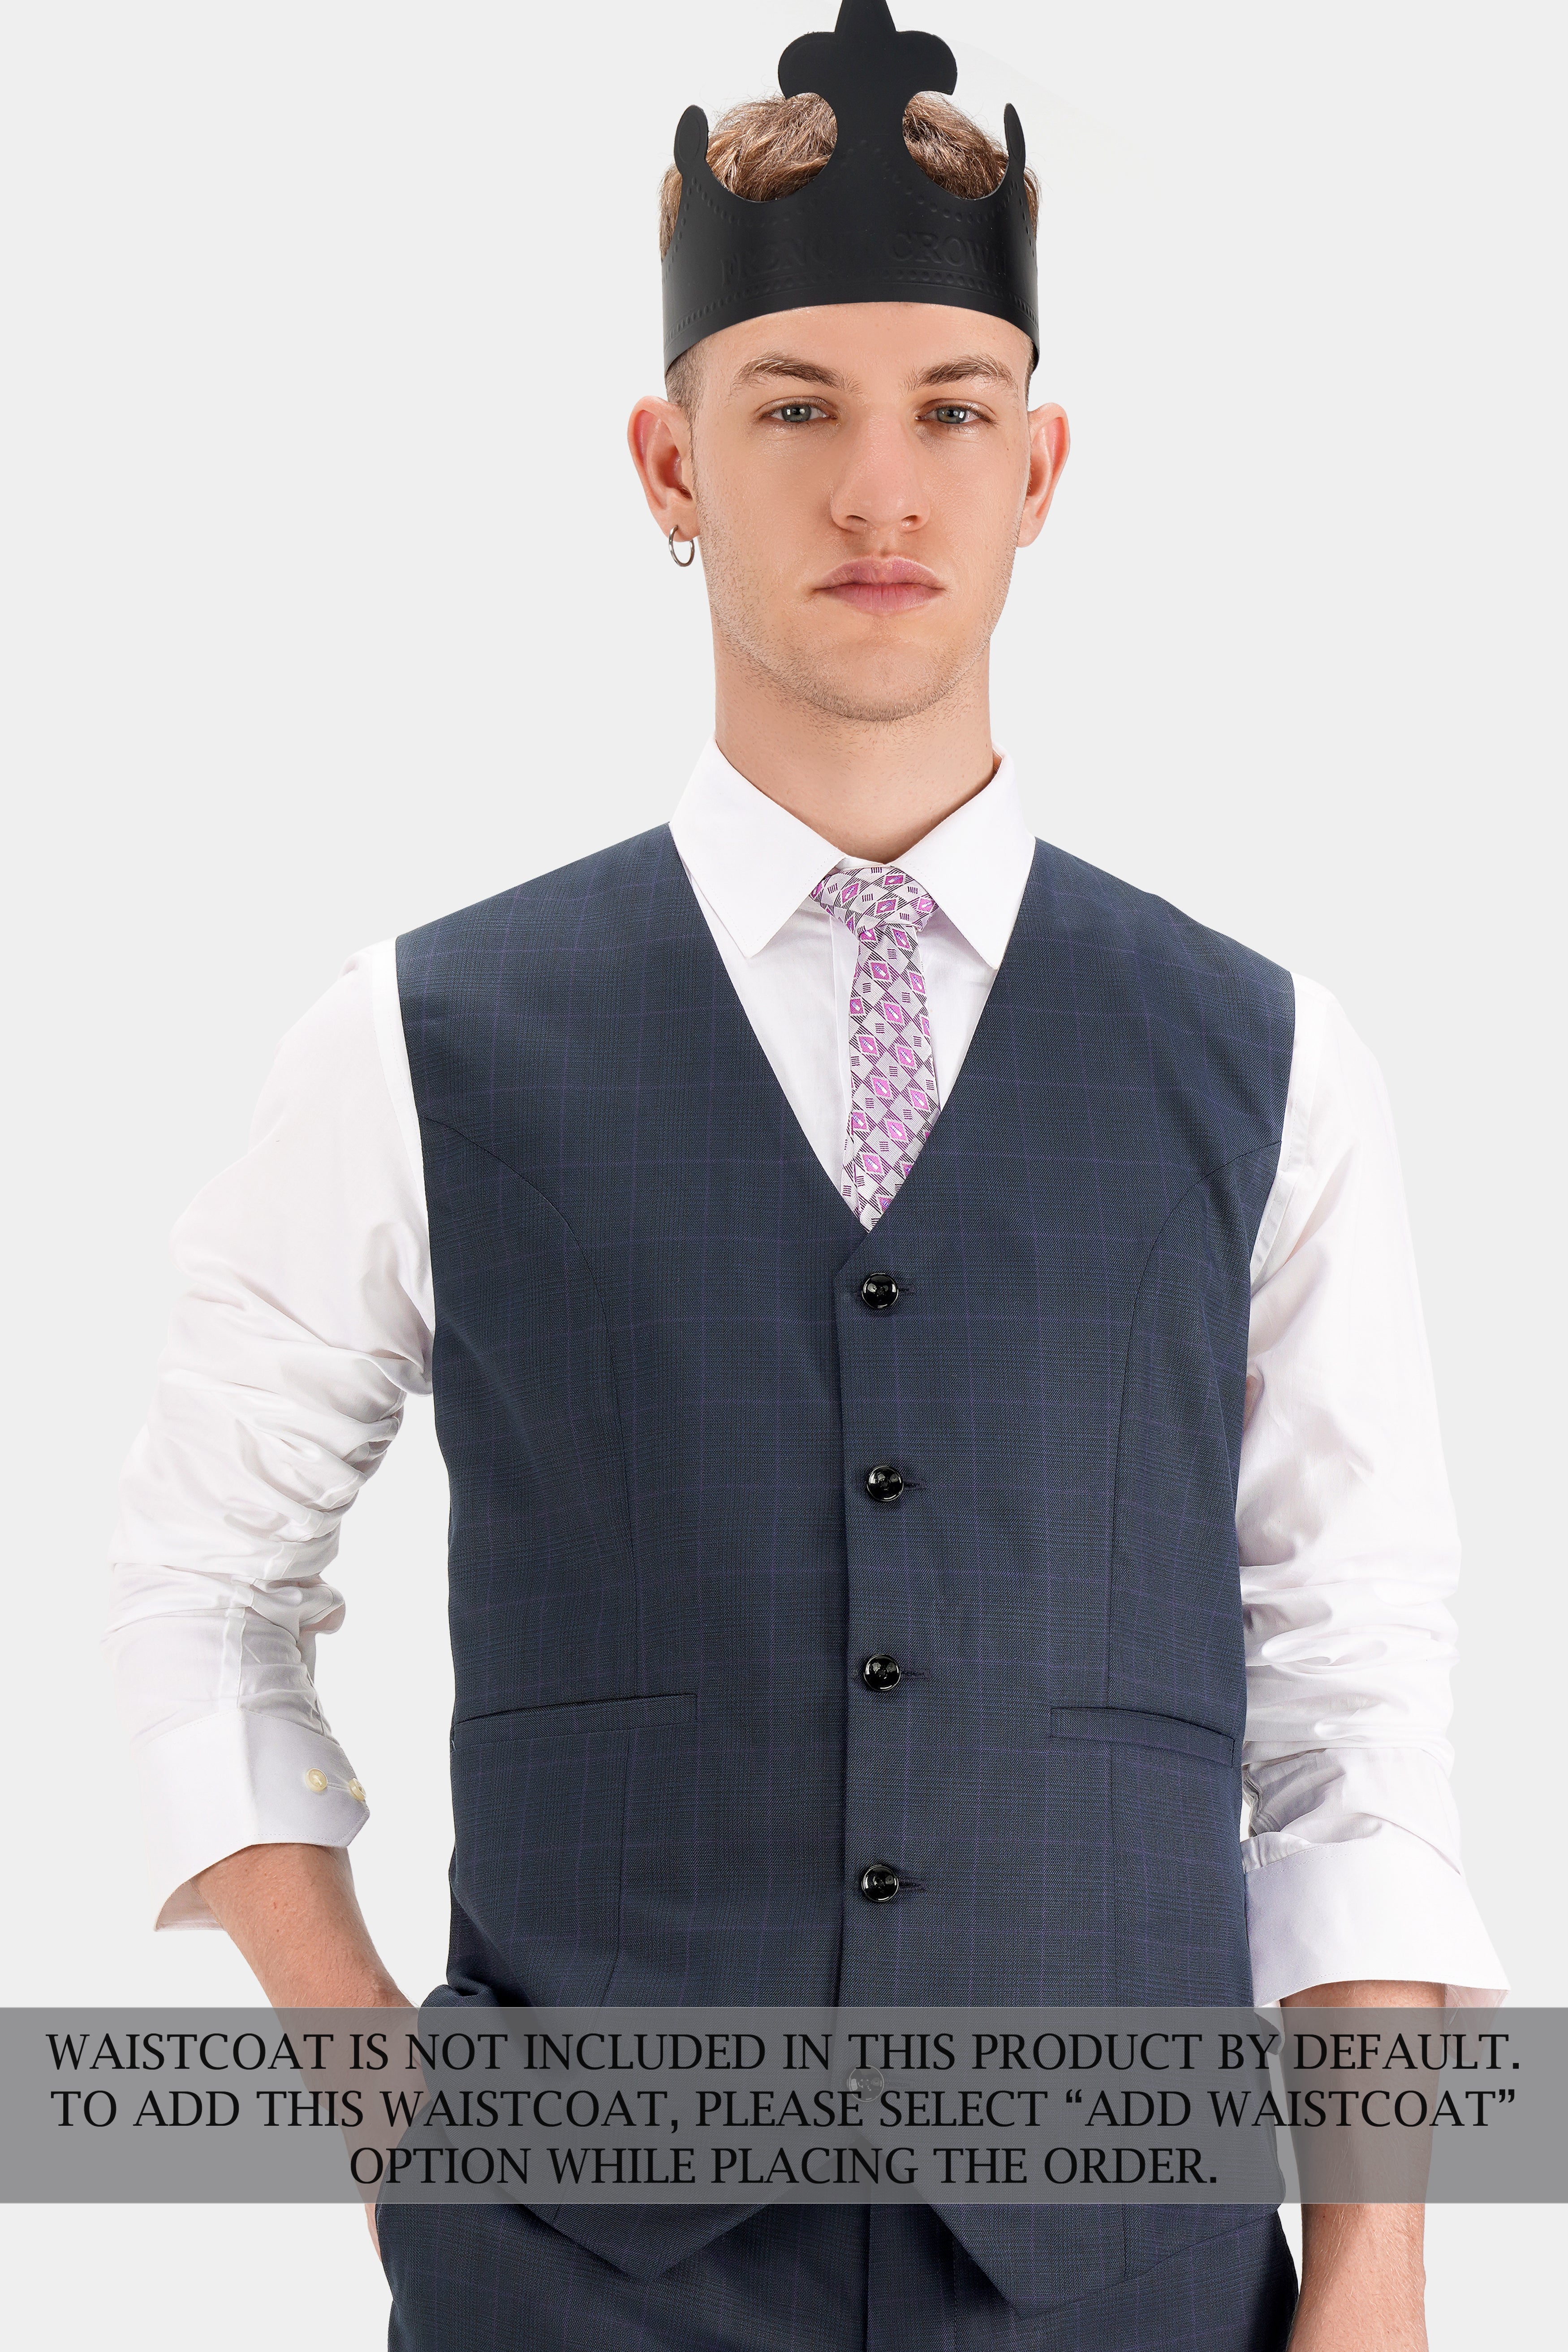 Baltic Blue with White Piping Work and Checkered Wool Rich Designer Suit ST2737-SB-D84-36,ST2737-SB-D84-38,ST2737-SB-D84-40,ST2737-SB-D84-42,ST2737-SB-D84-44,ST2737-SB-D84-46,ST2737-SB-D84-48,ST2737-SB-D84-50,ST2737-SB-D84-52,ST2737-SB-D84-54,ST2737-SB-D84-56,ST2737-SB-D84-58,ST2737-SB-D84-60